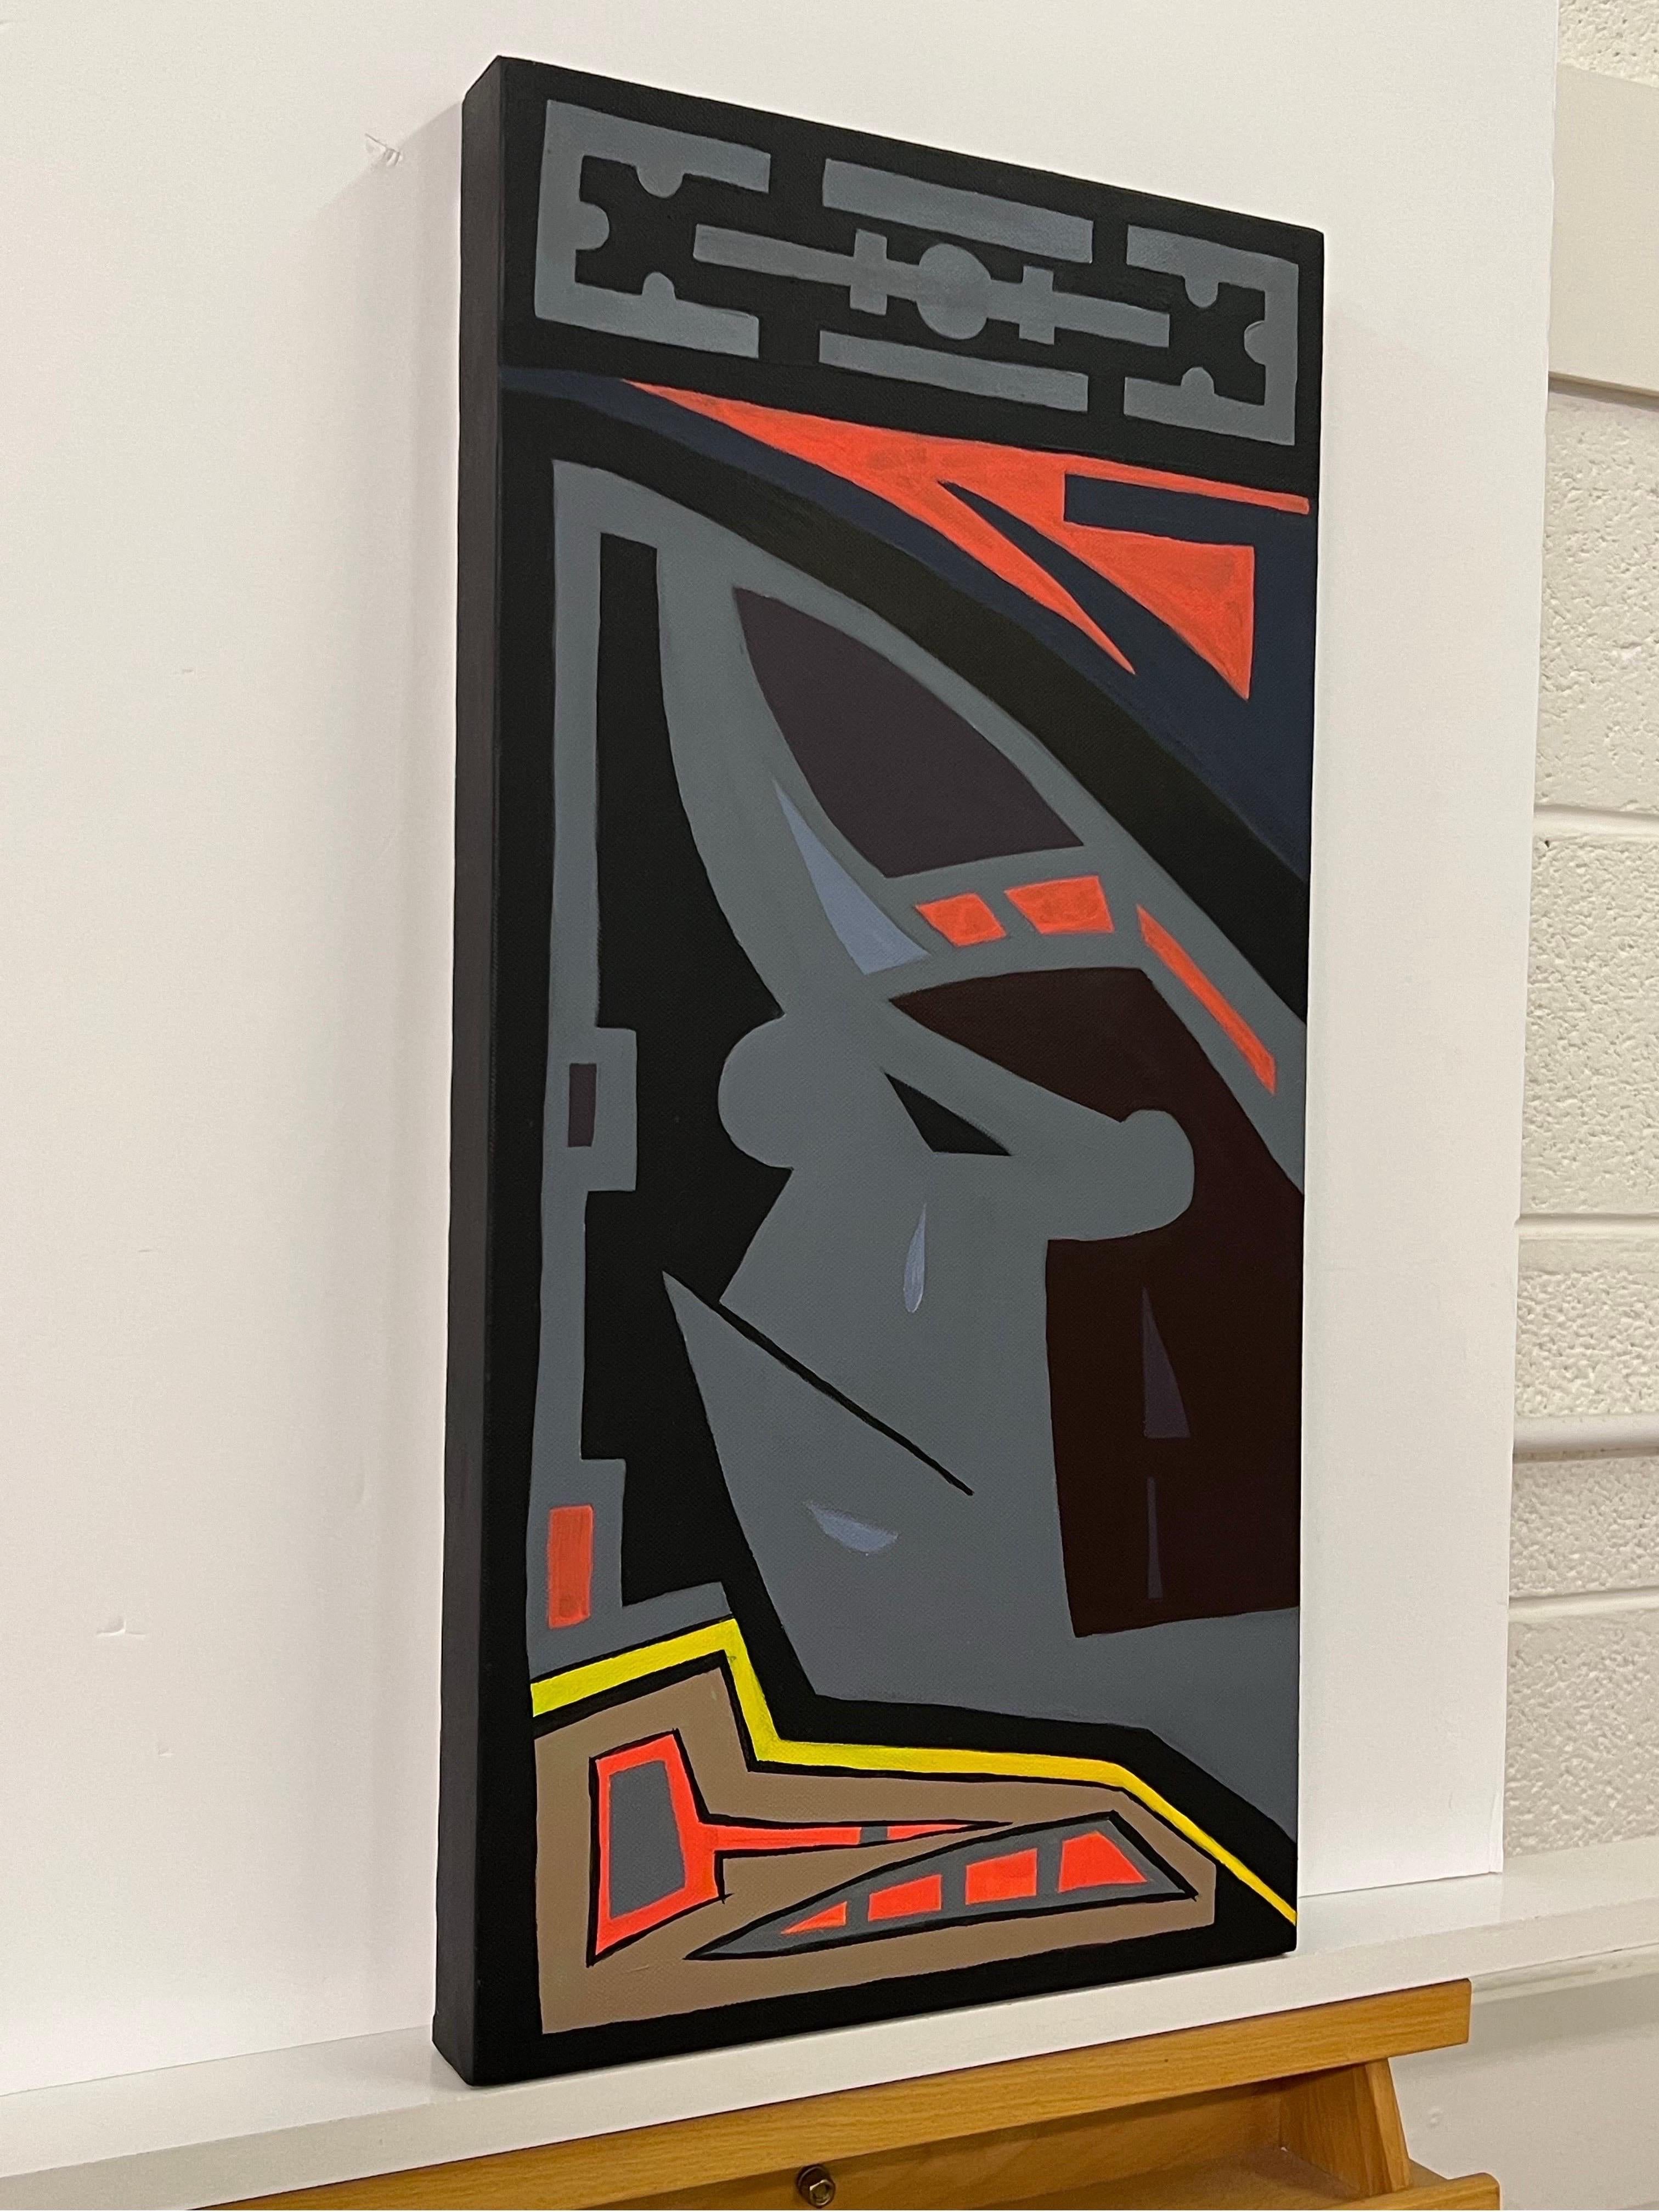 'Crying Aztec' Tribal Cartoon Painting on Canvas by Contemporary British Artist. A thought-provoking surreal & playful reference to the concept of Ancient Astronauts using stone grey, black, orange & yellow colours. This is a unique original